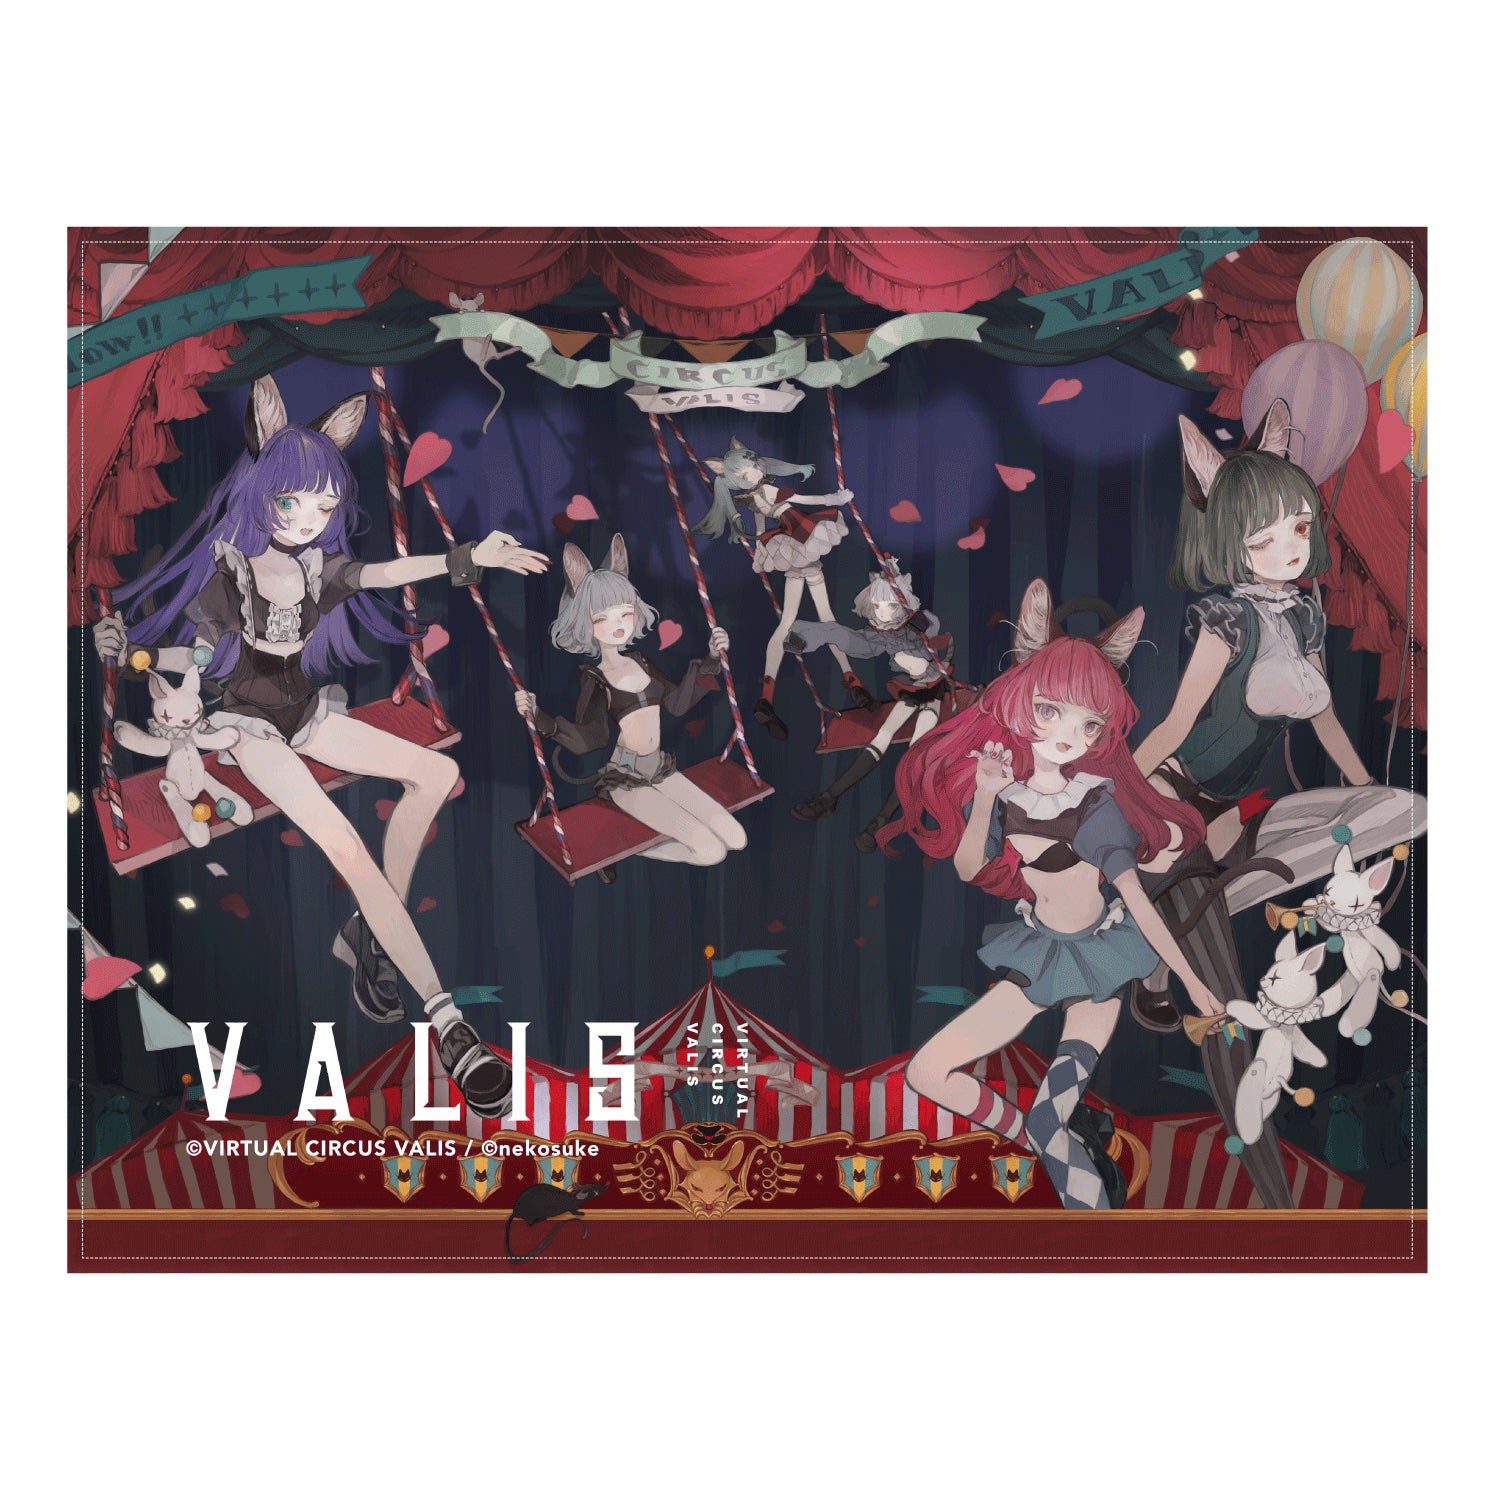 VALIS 2nd ONE-MAN LIVE「転生デパーチャー」 – FINDME STORE by THINKR